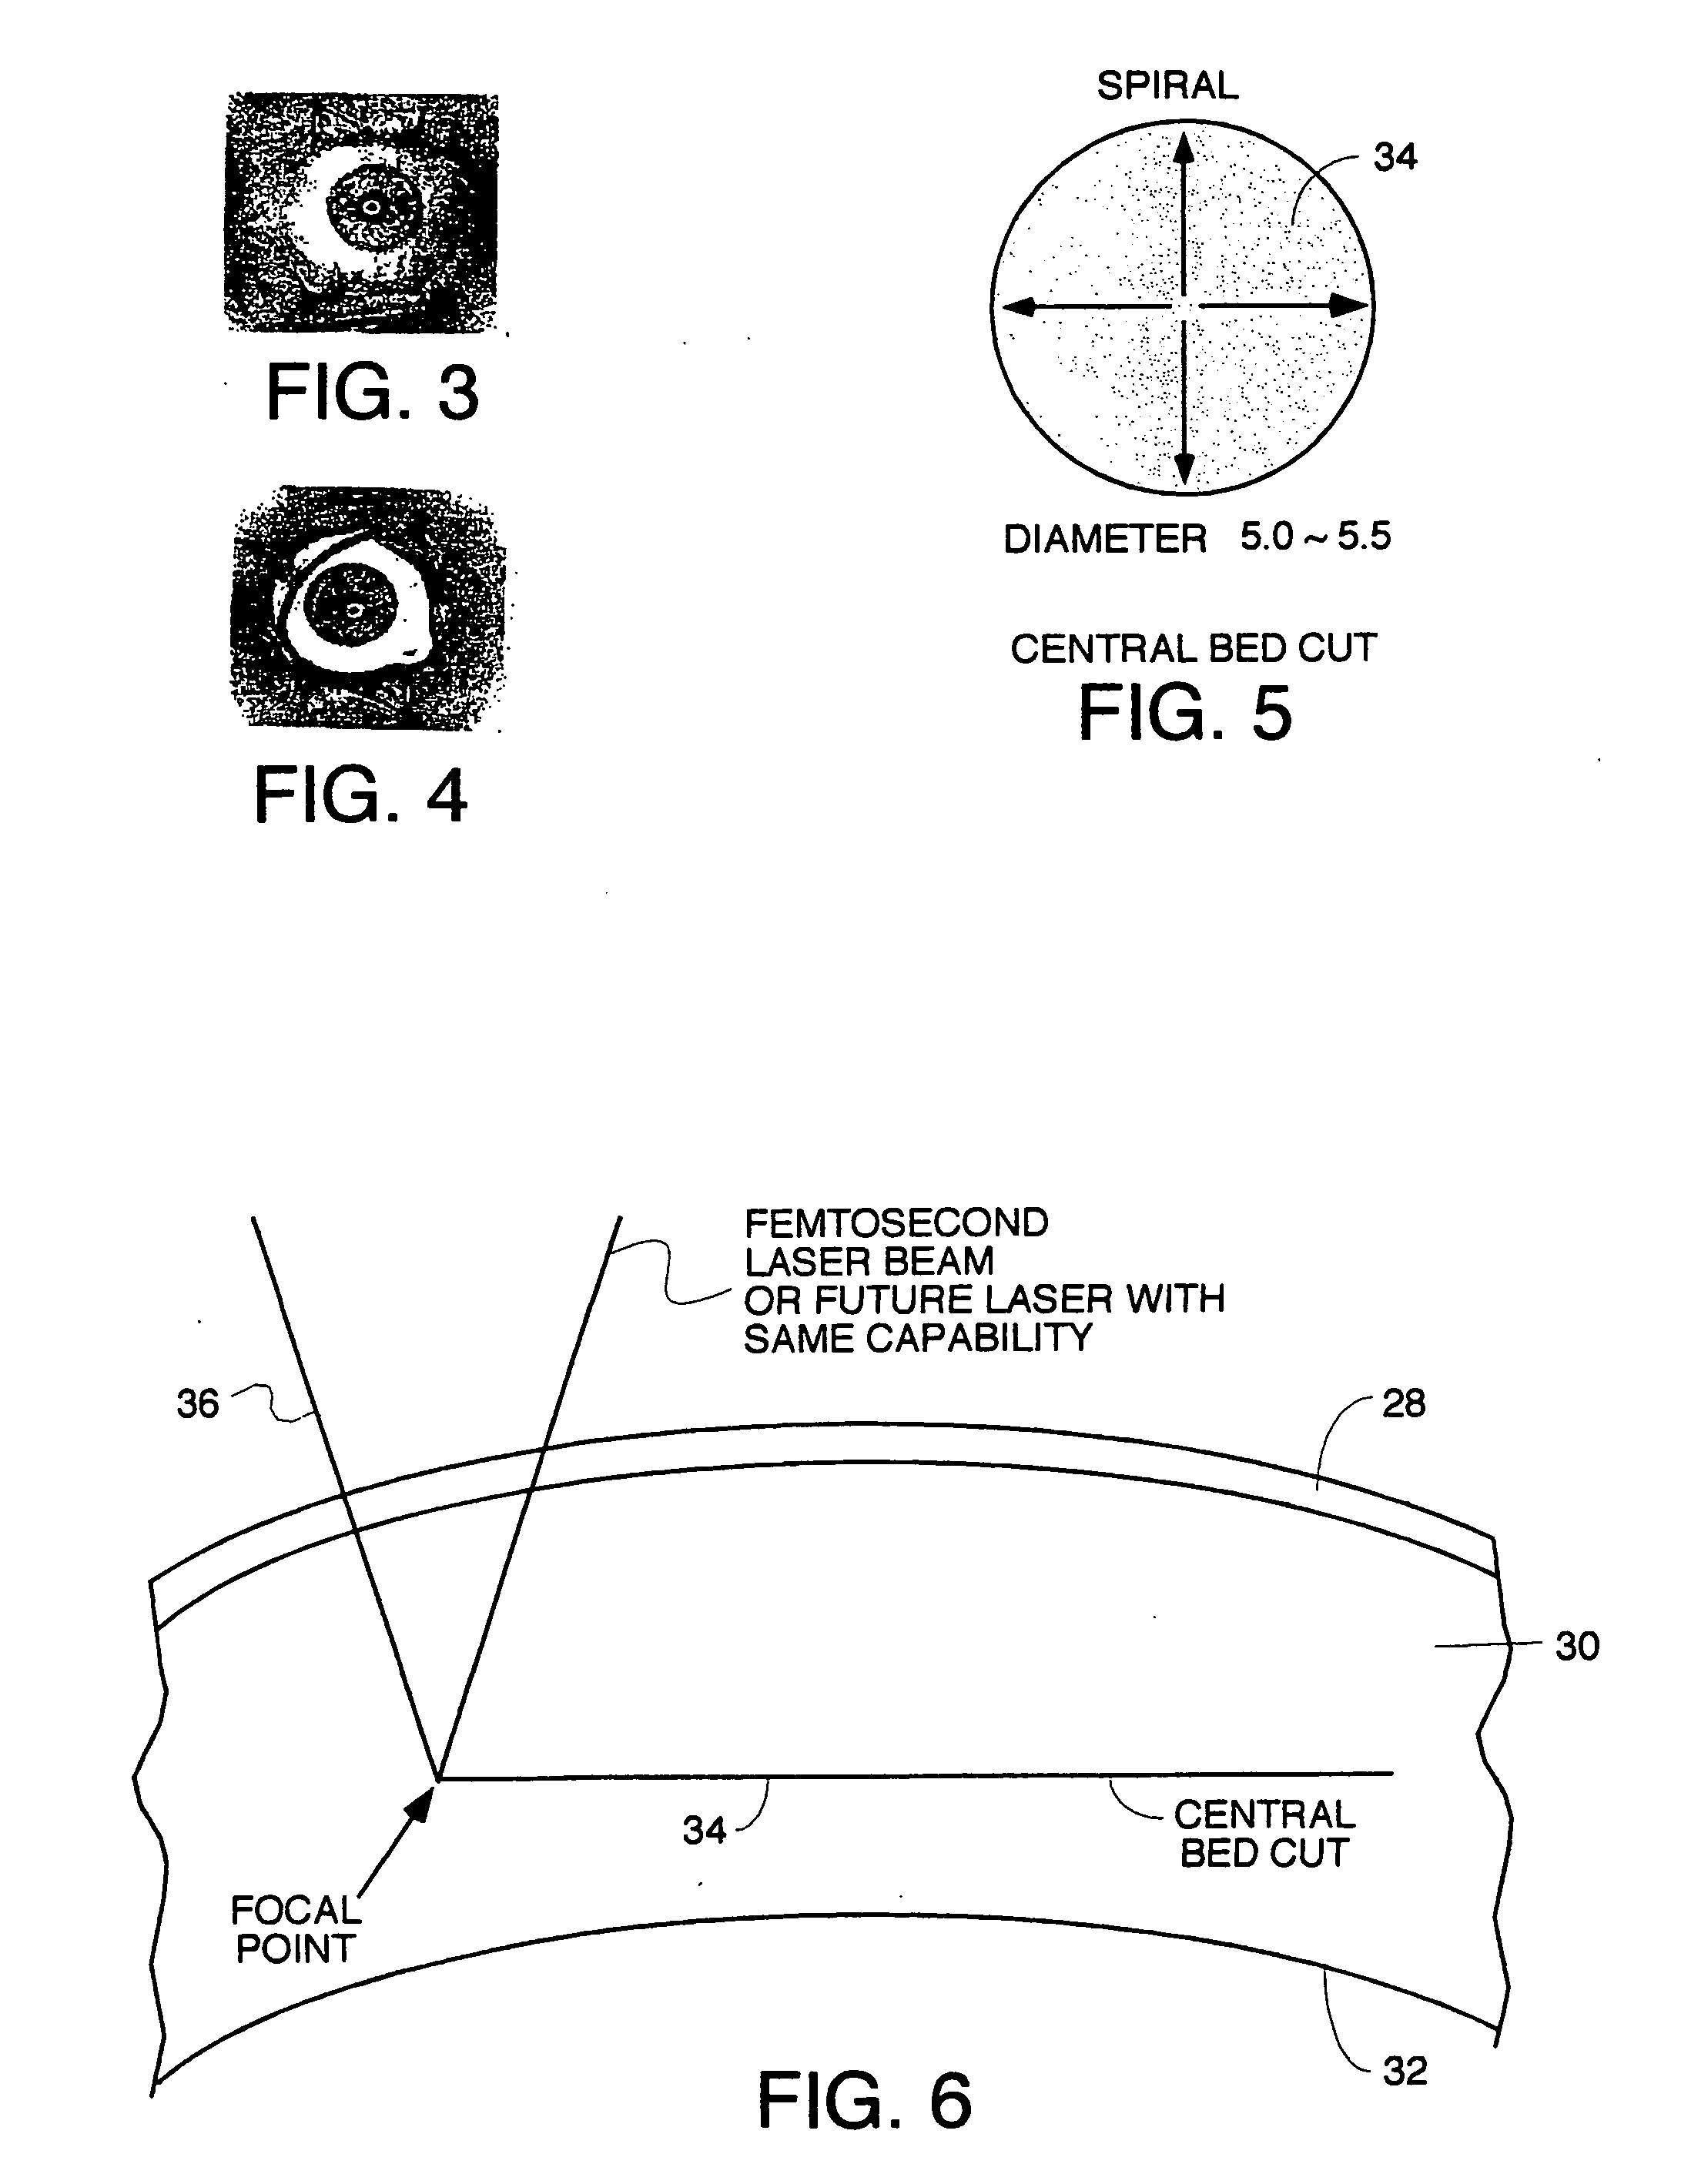 Surgical procedure and instrumentation for intrastromal implants of lens or strengthening materials